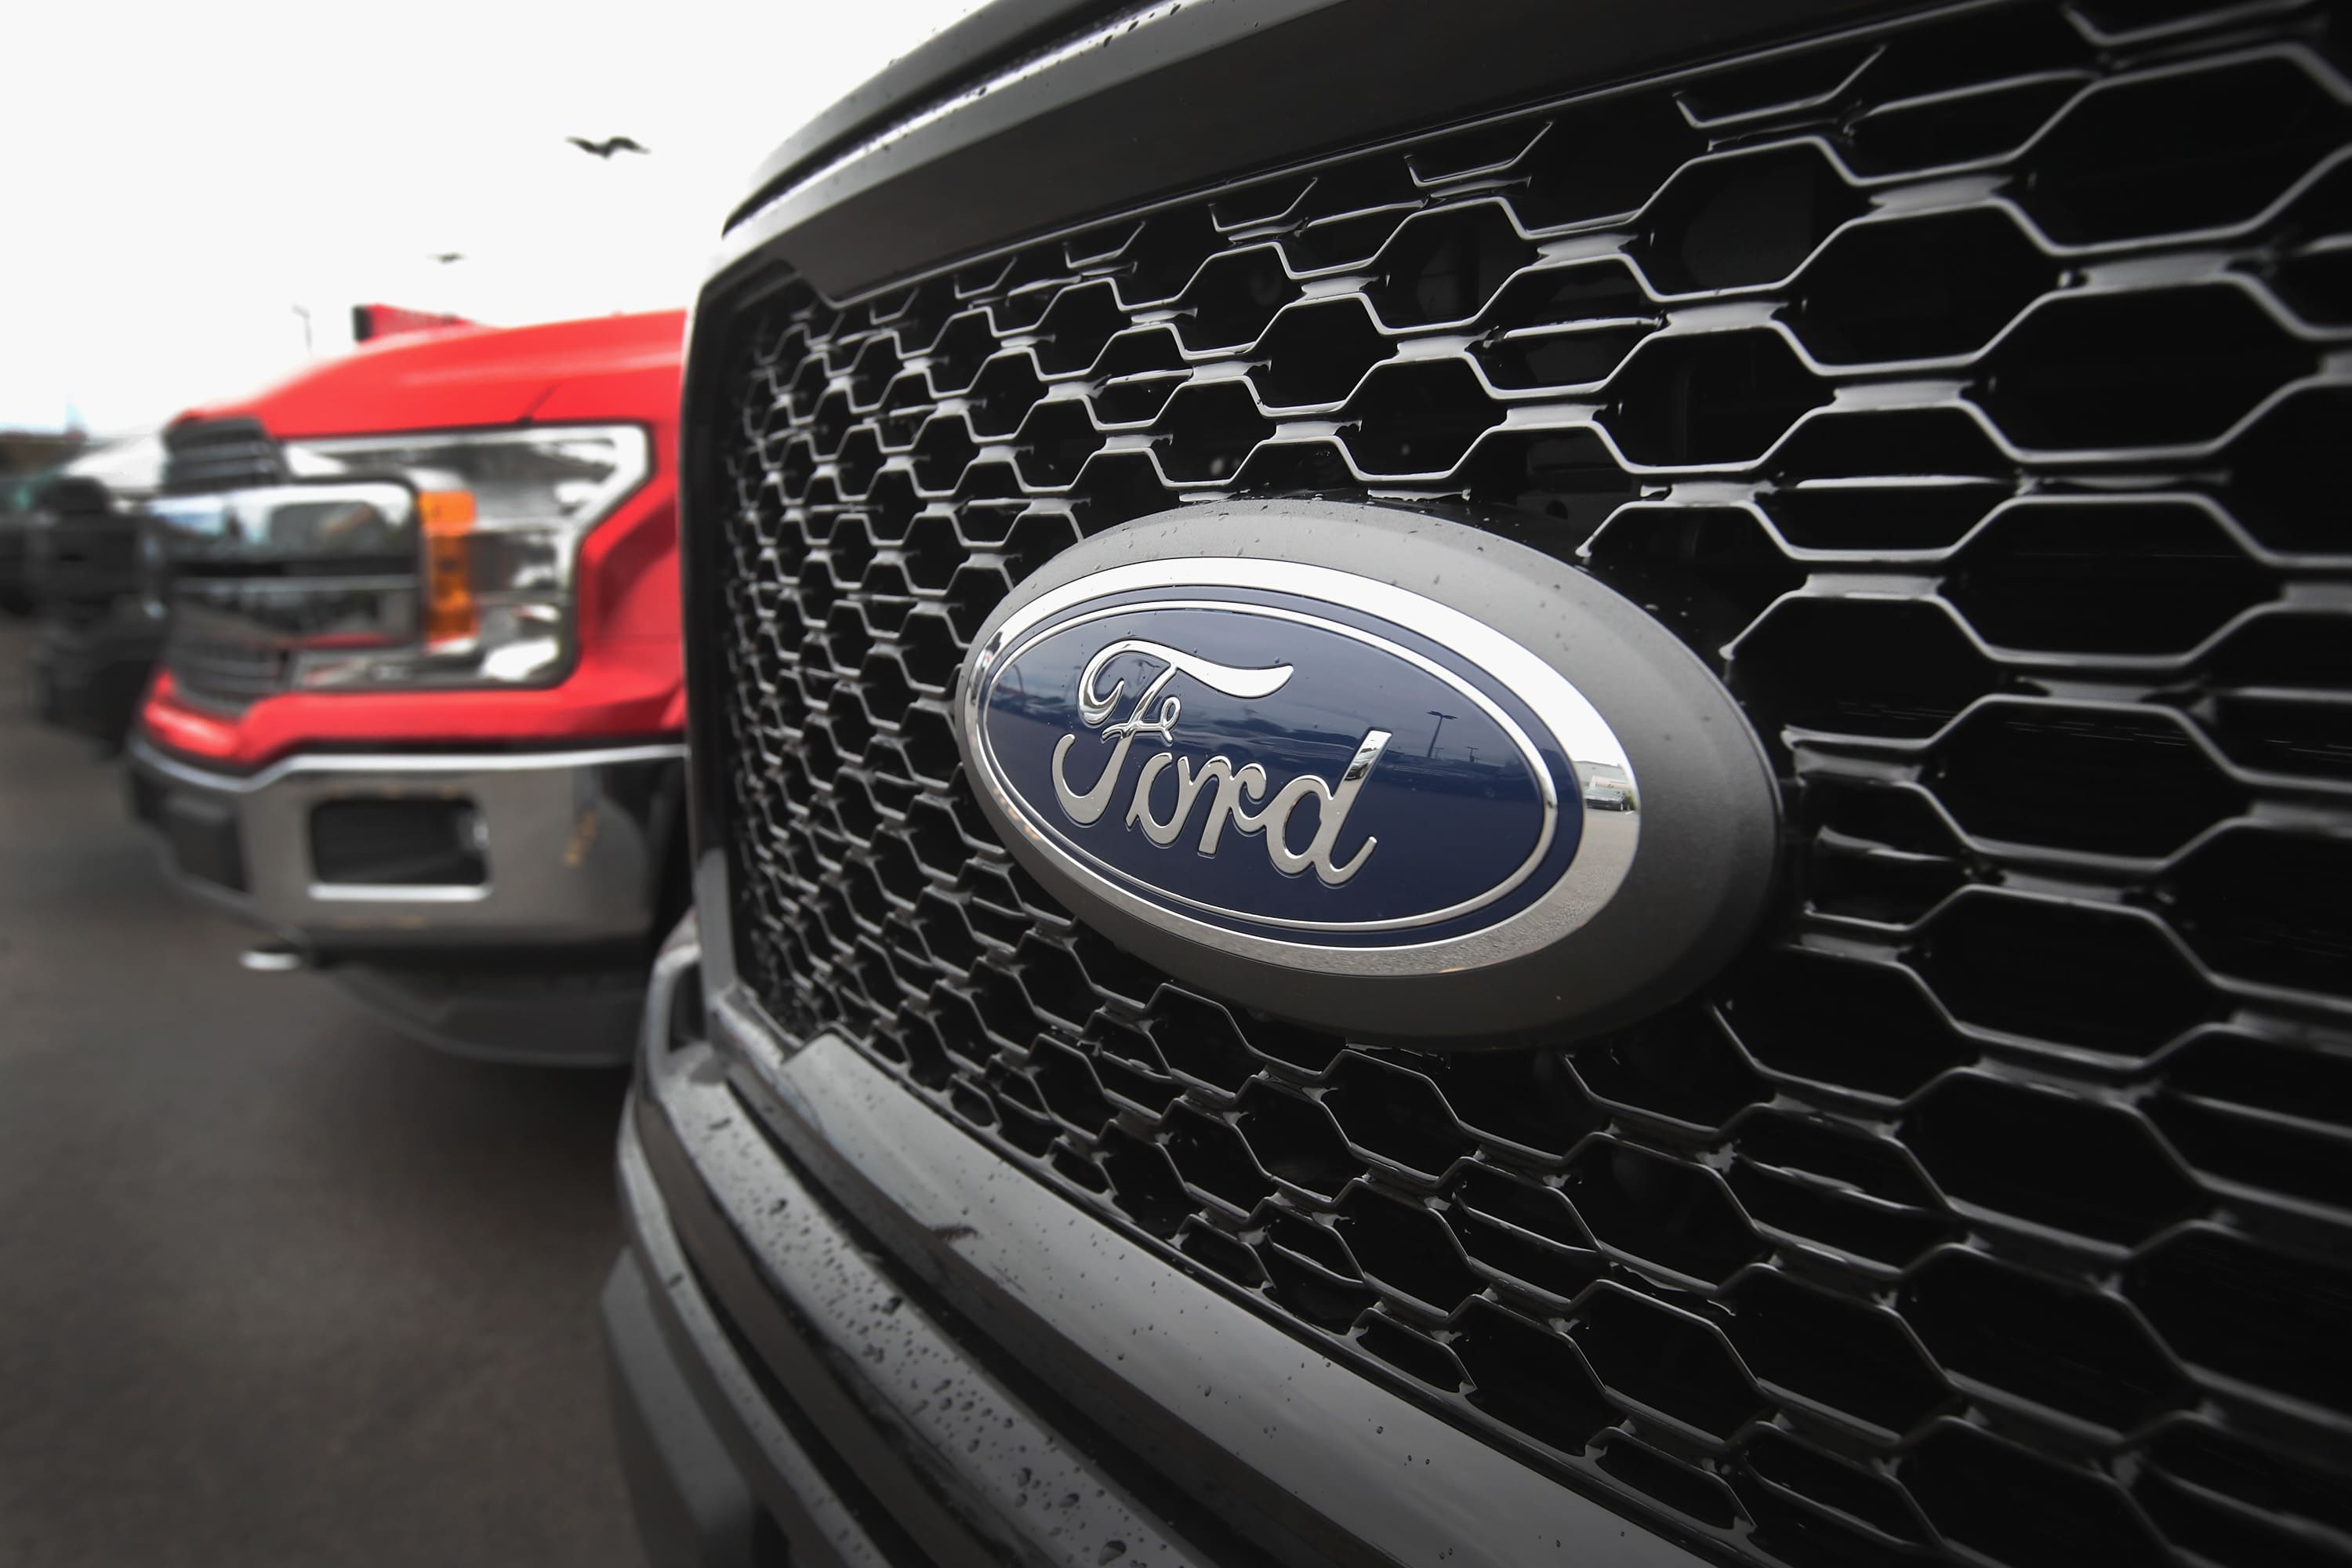 Ford signs five-year payment agreement with Stripe for e-commerce